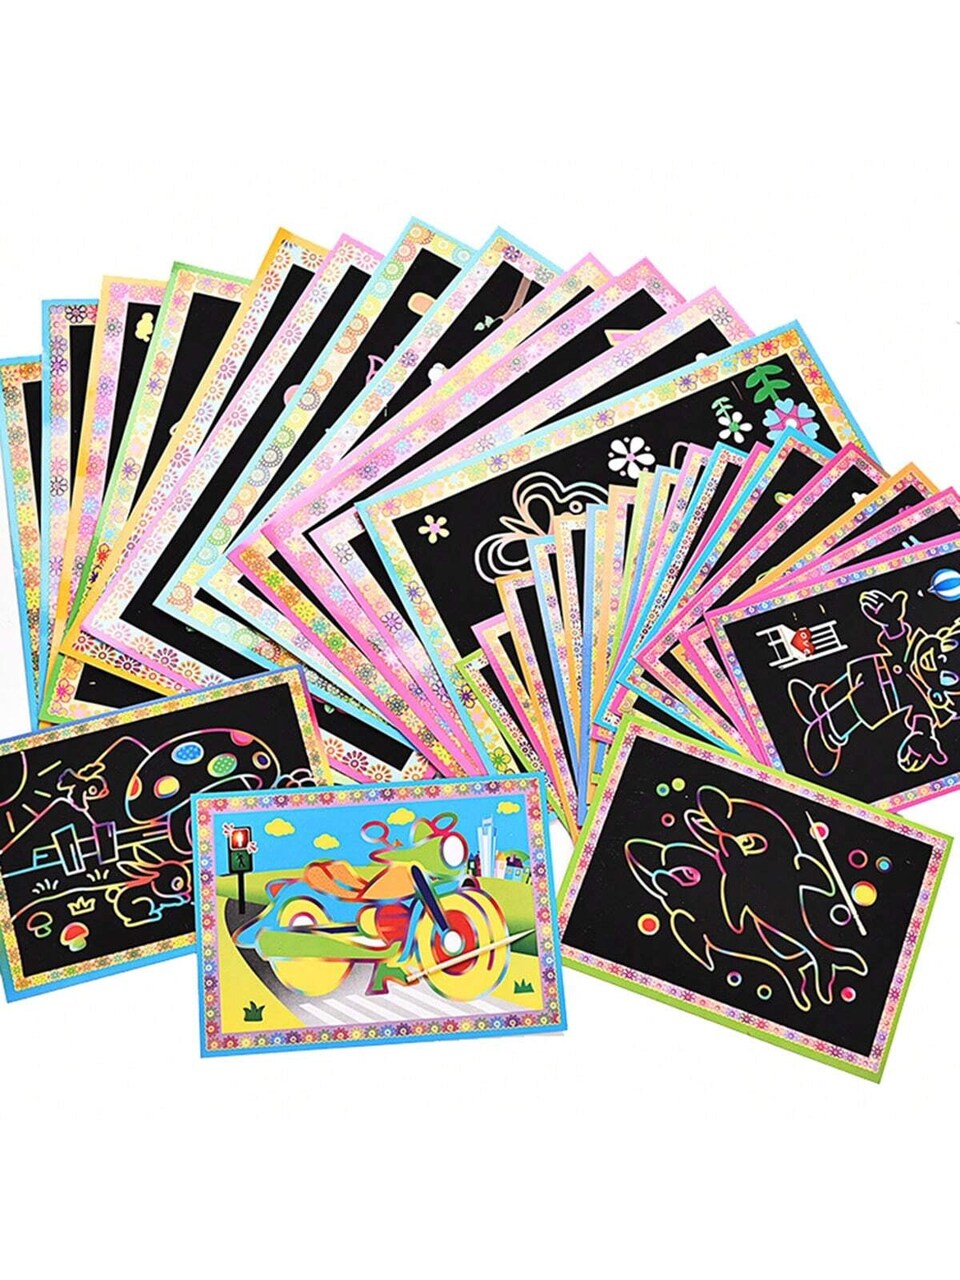 10Pcs/Lot Children Magic Scratch Painting Toys Kids Art Doodle Pad Painting  Cards More than 30+ Style Ship Random Children Early Educational Learning  Drawing Toys